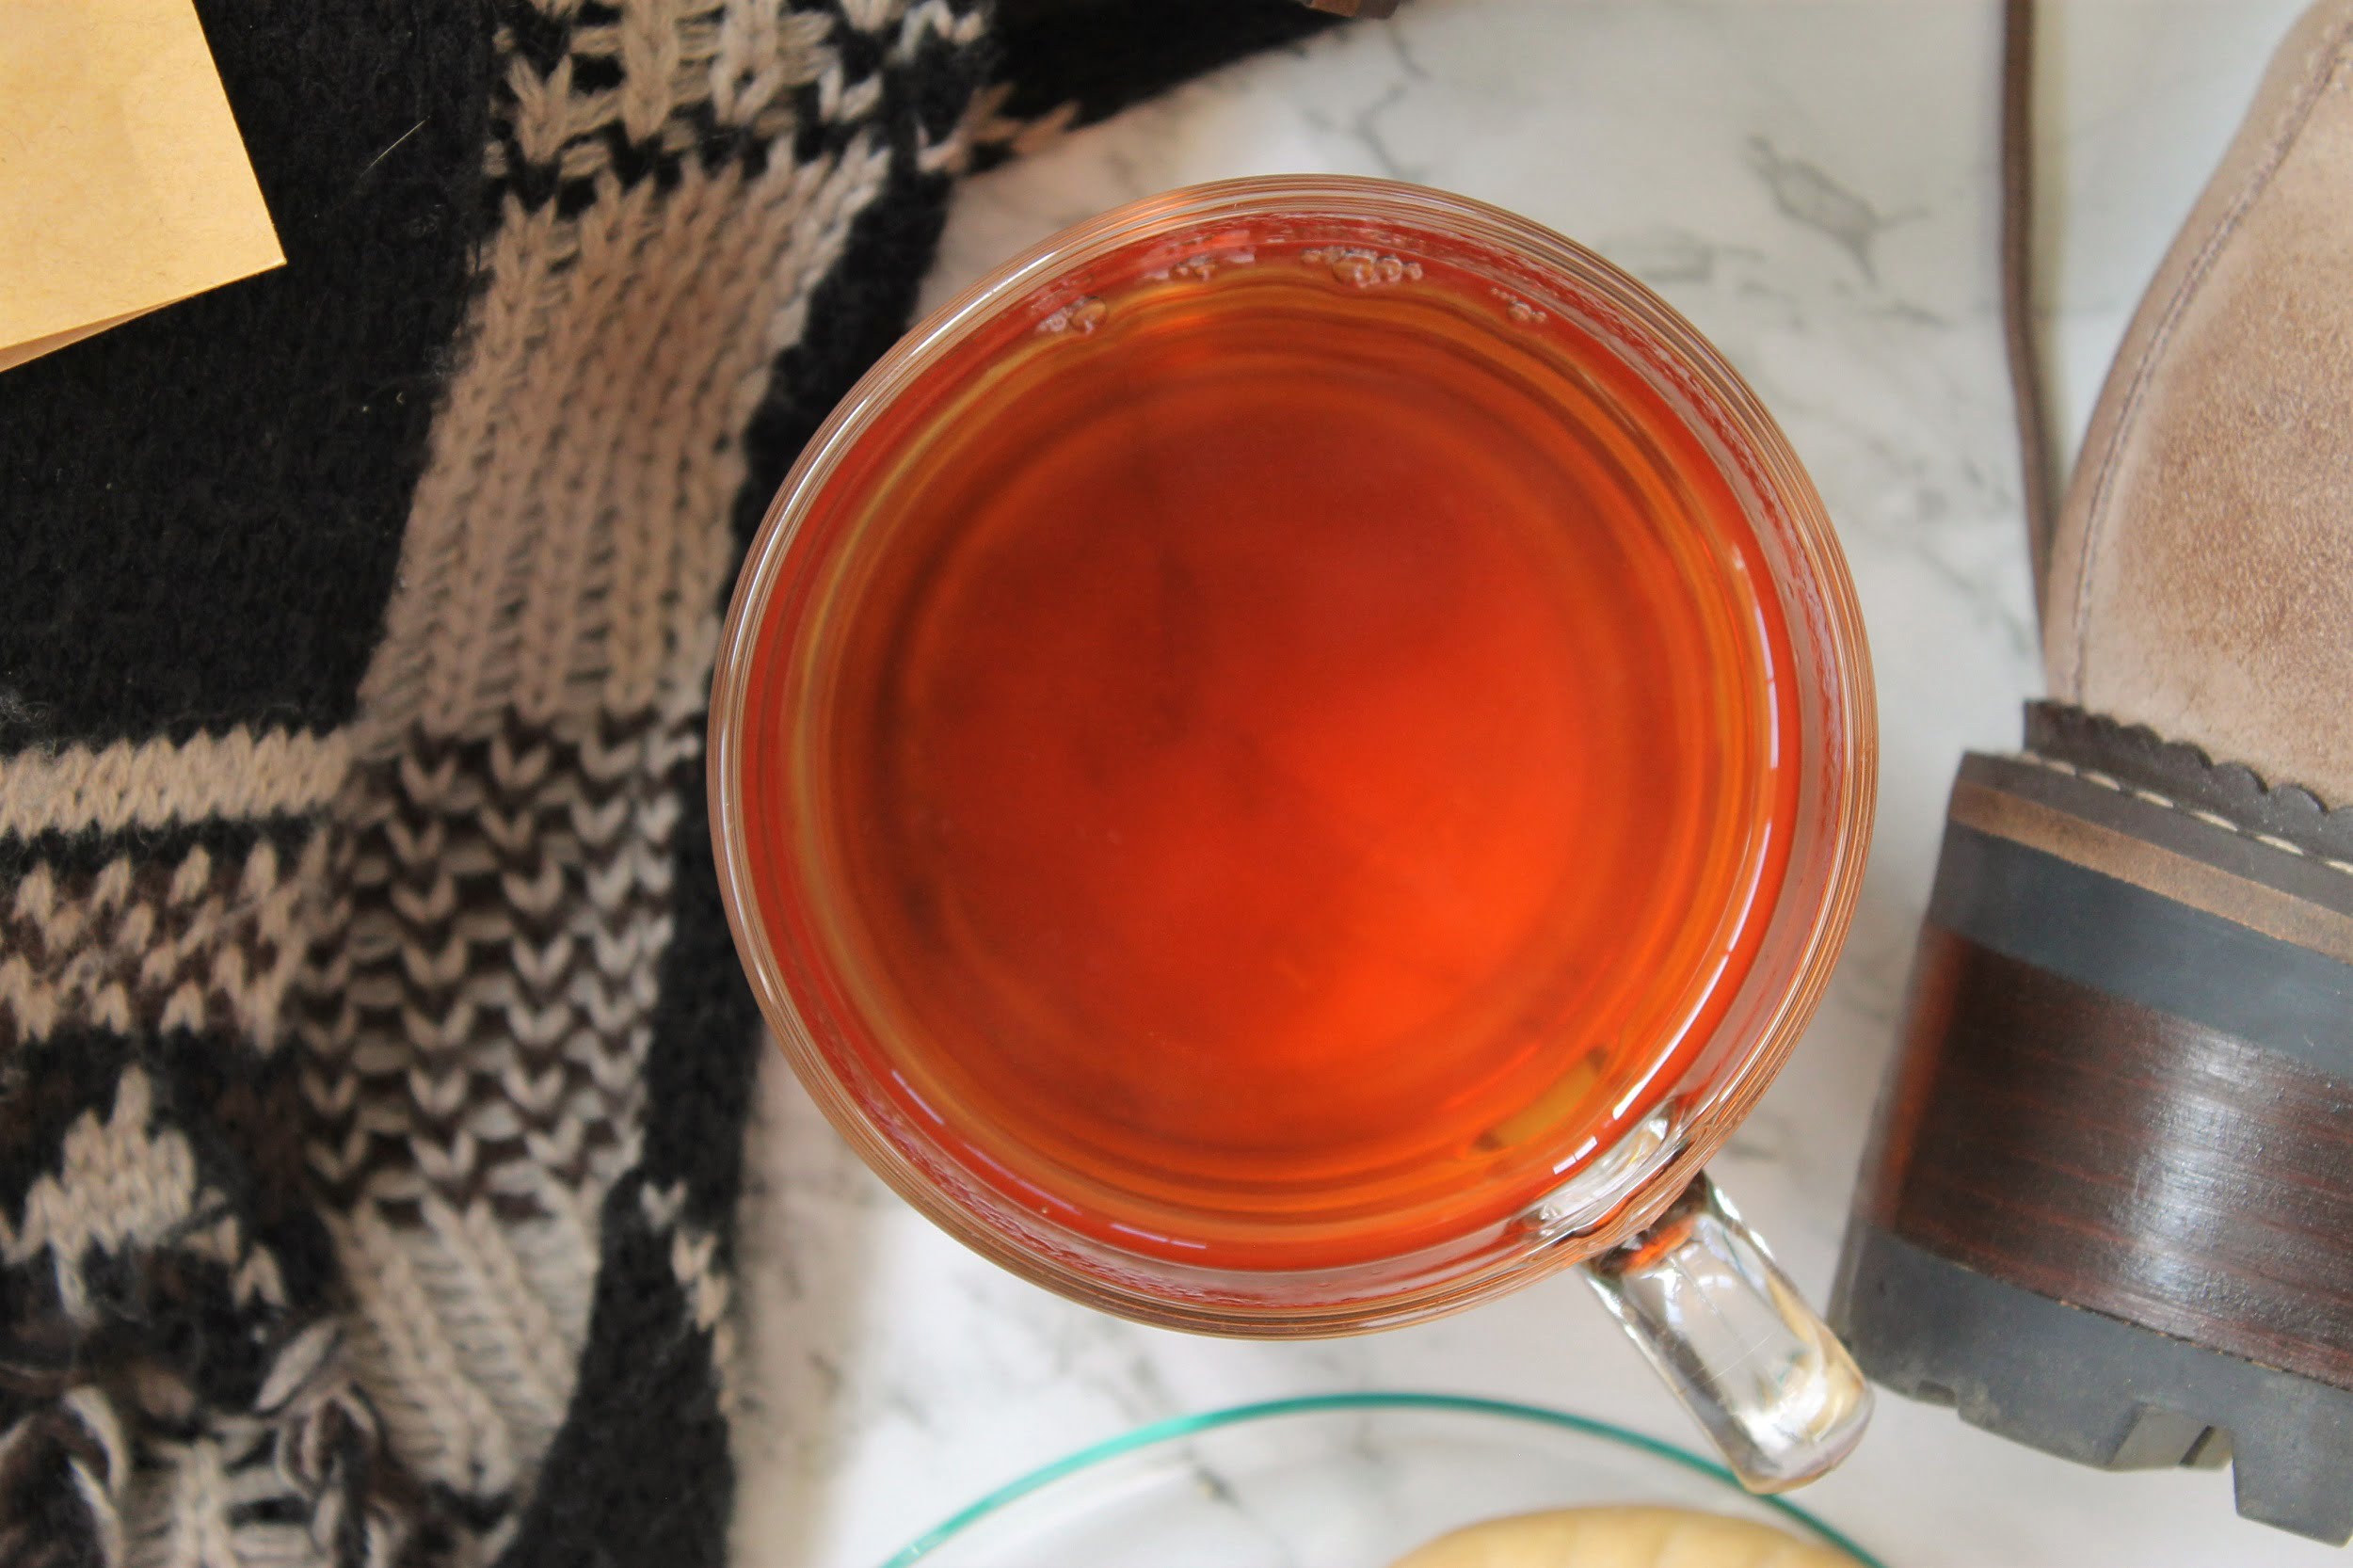 spiced lapsang souchong tea